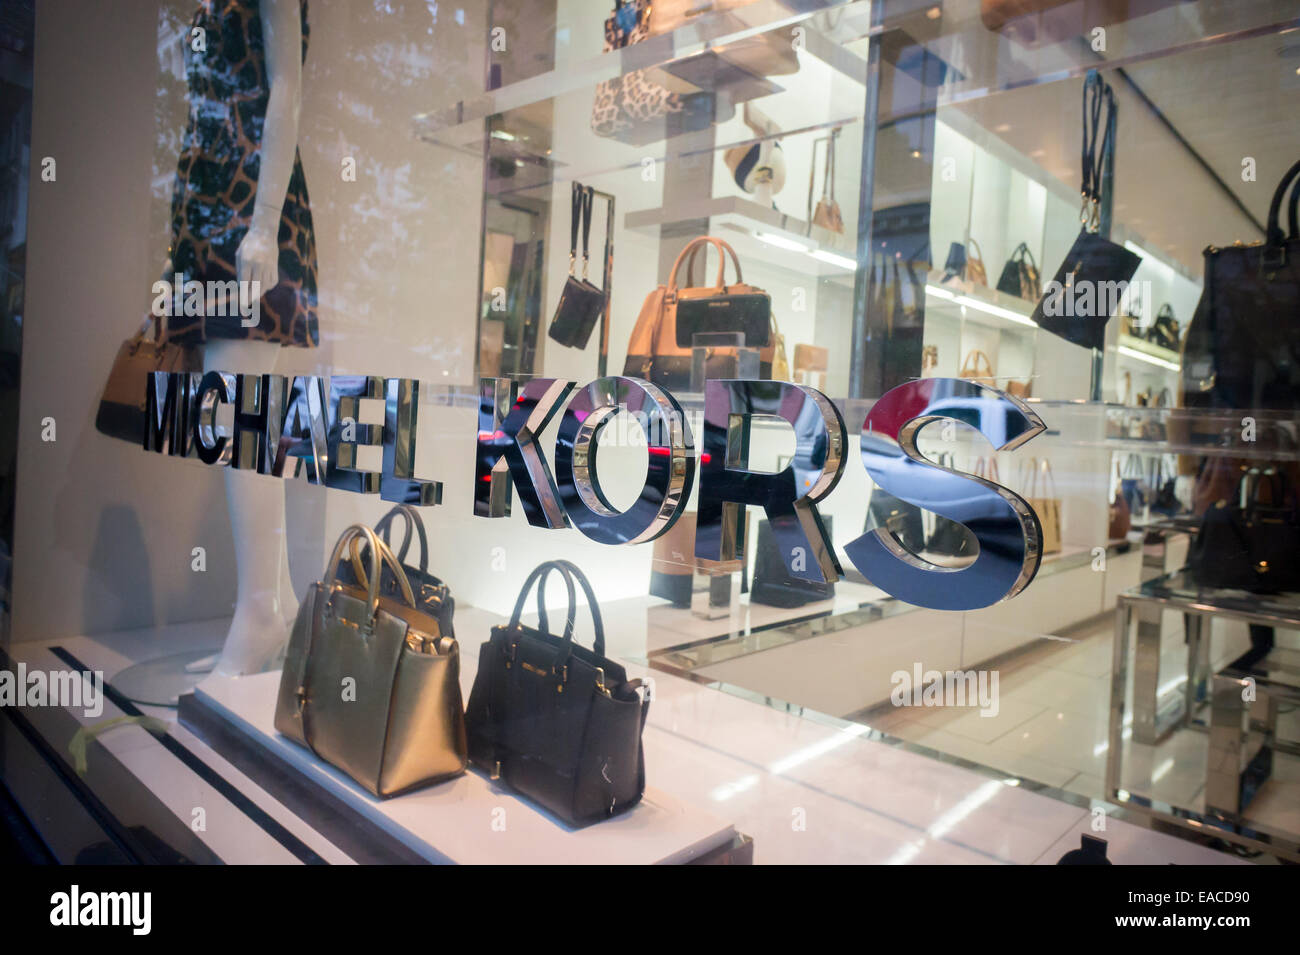 Nordstrom stores are scrapping Michael Kors handbags - MarketWatch